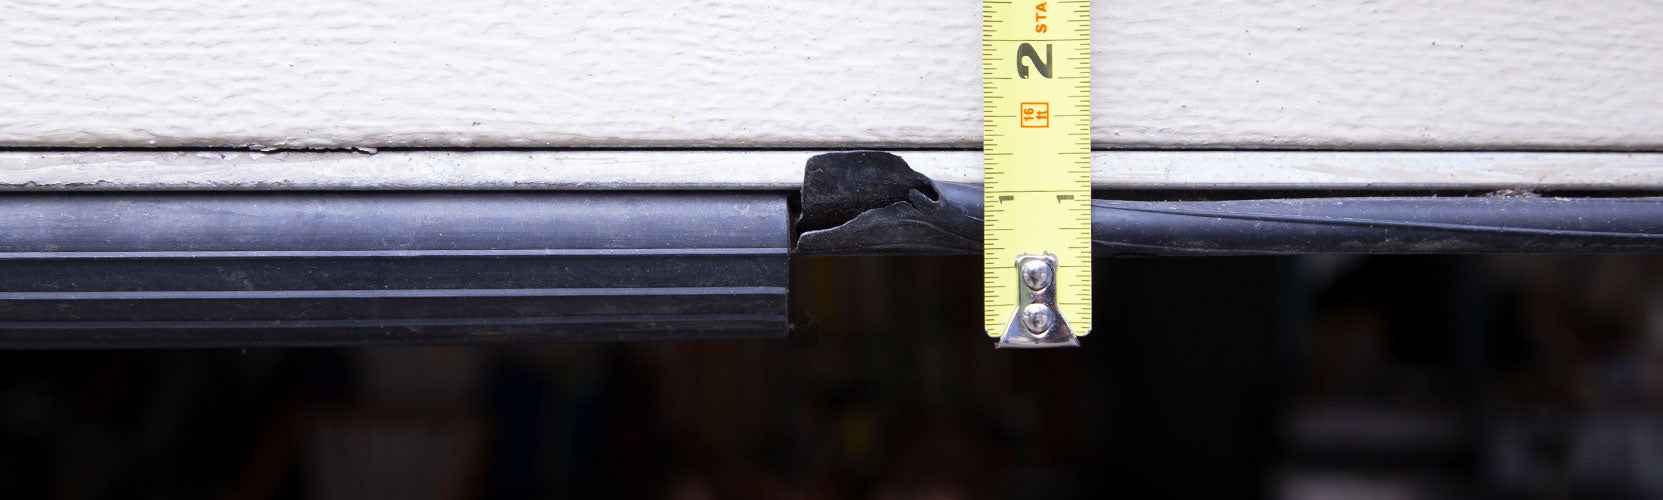 How to Fully Seal the Bottom of an Uneven Garage Door